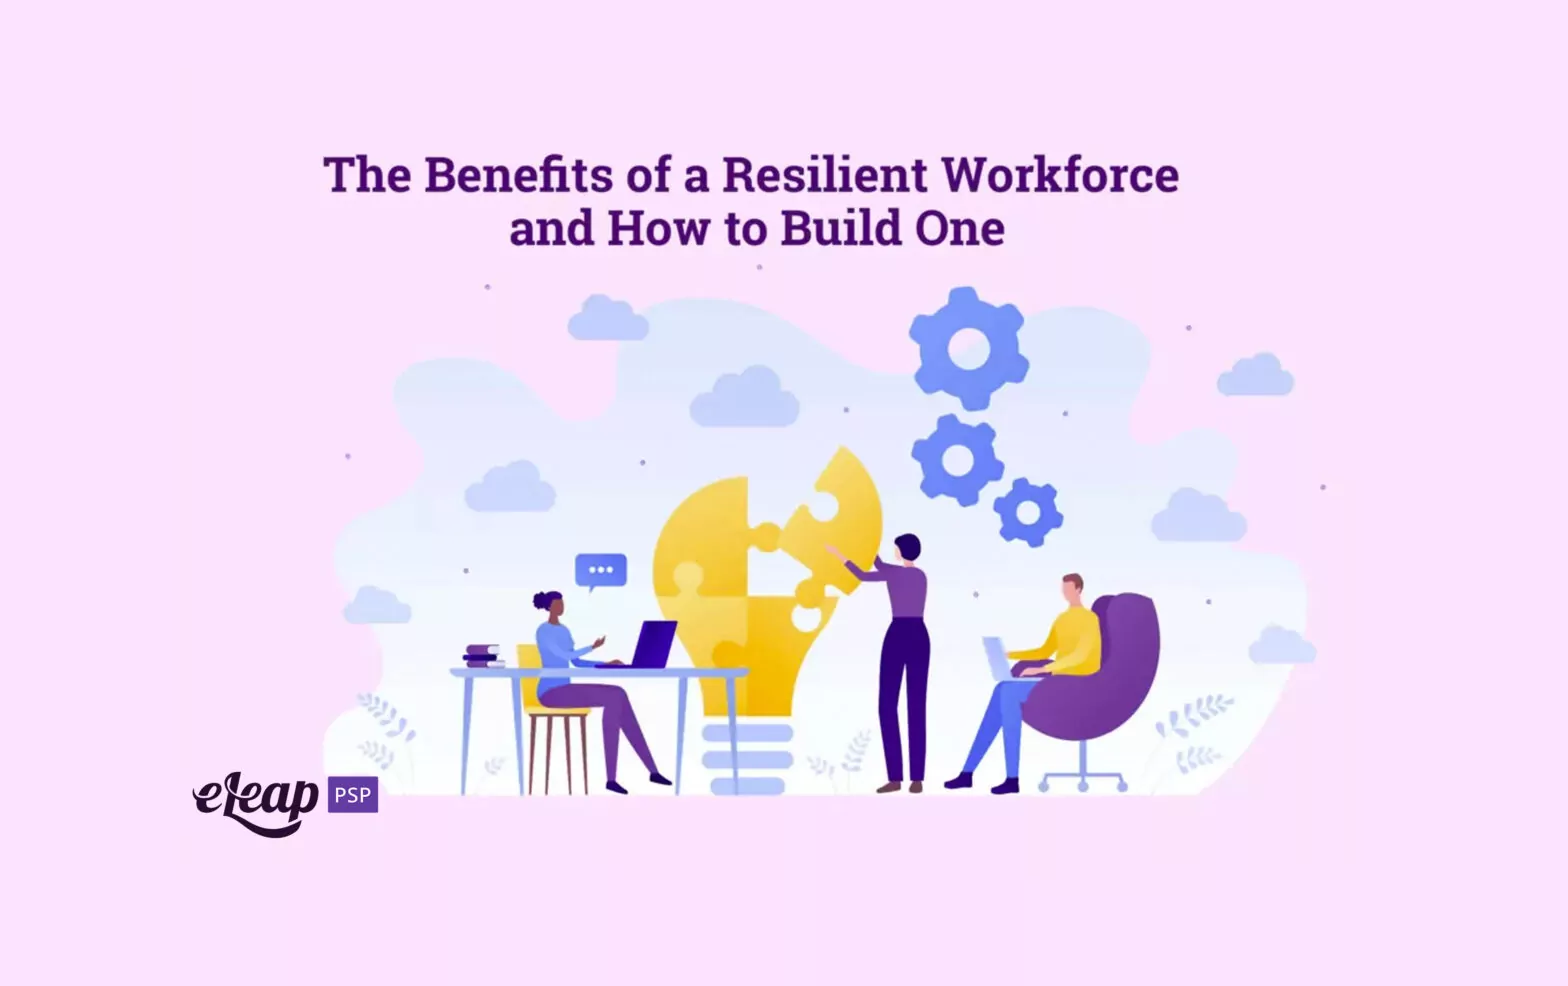 The Benefits of a Resilient Workforce and How to Build One